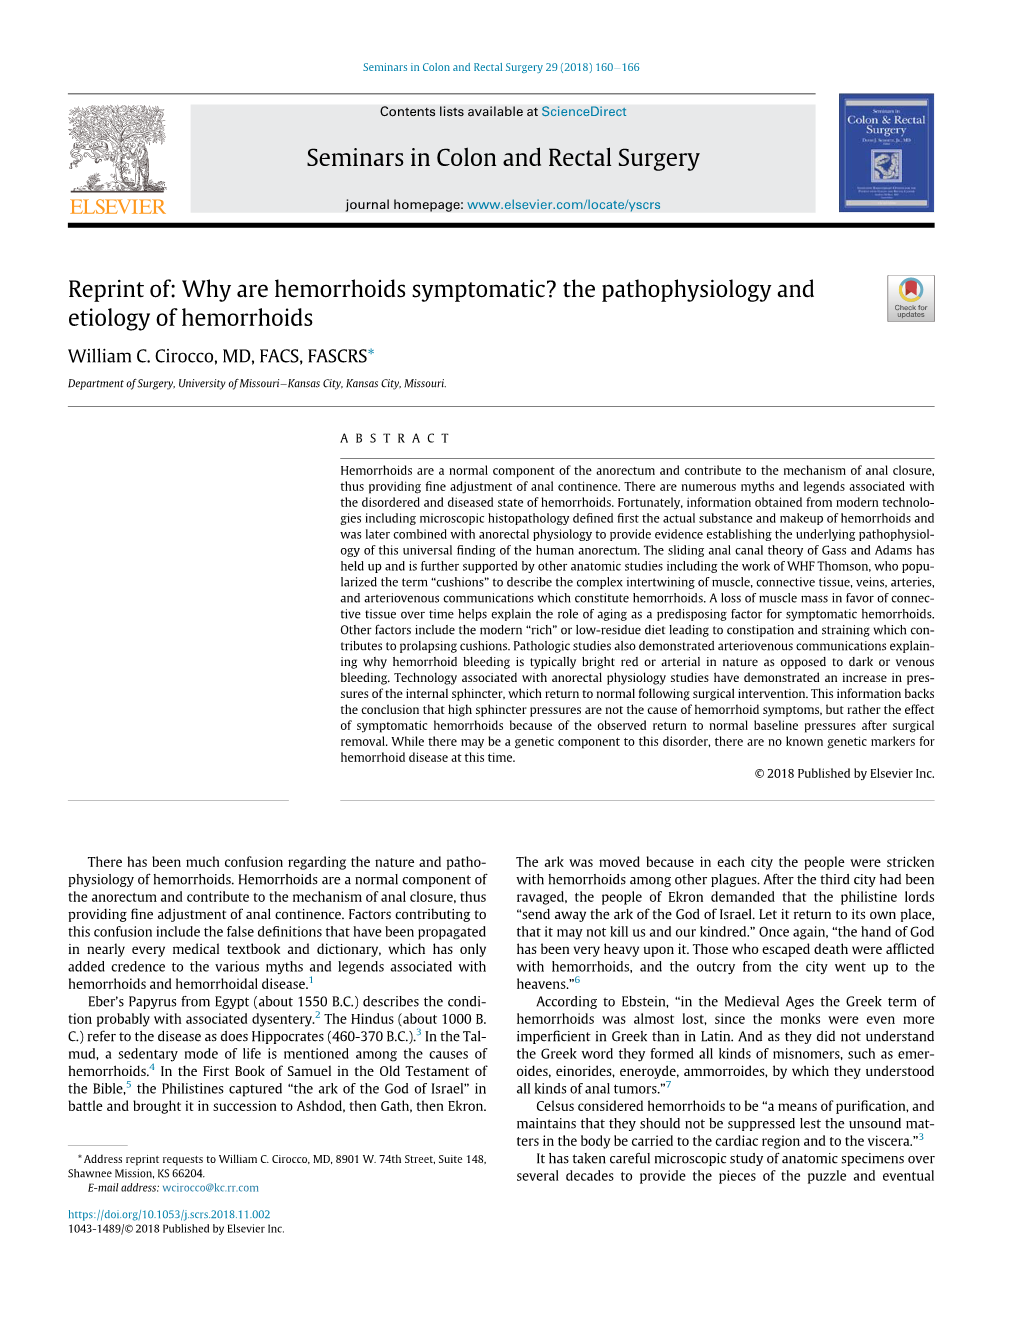 Reprint Of: Why Are Hemorrhoids Symptomatic? the Pathophysiology and Etiology of Hemorrhoids